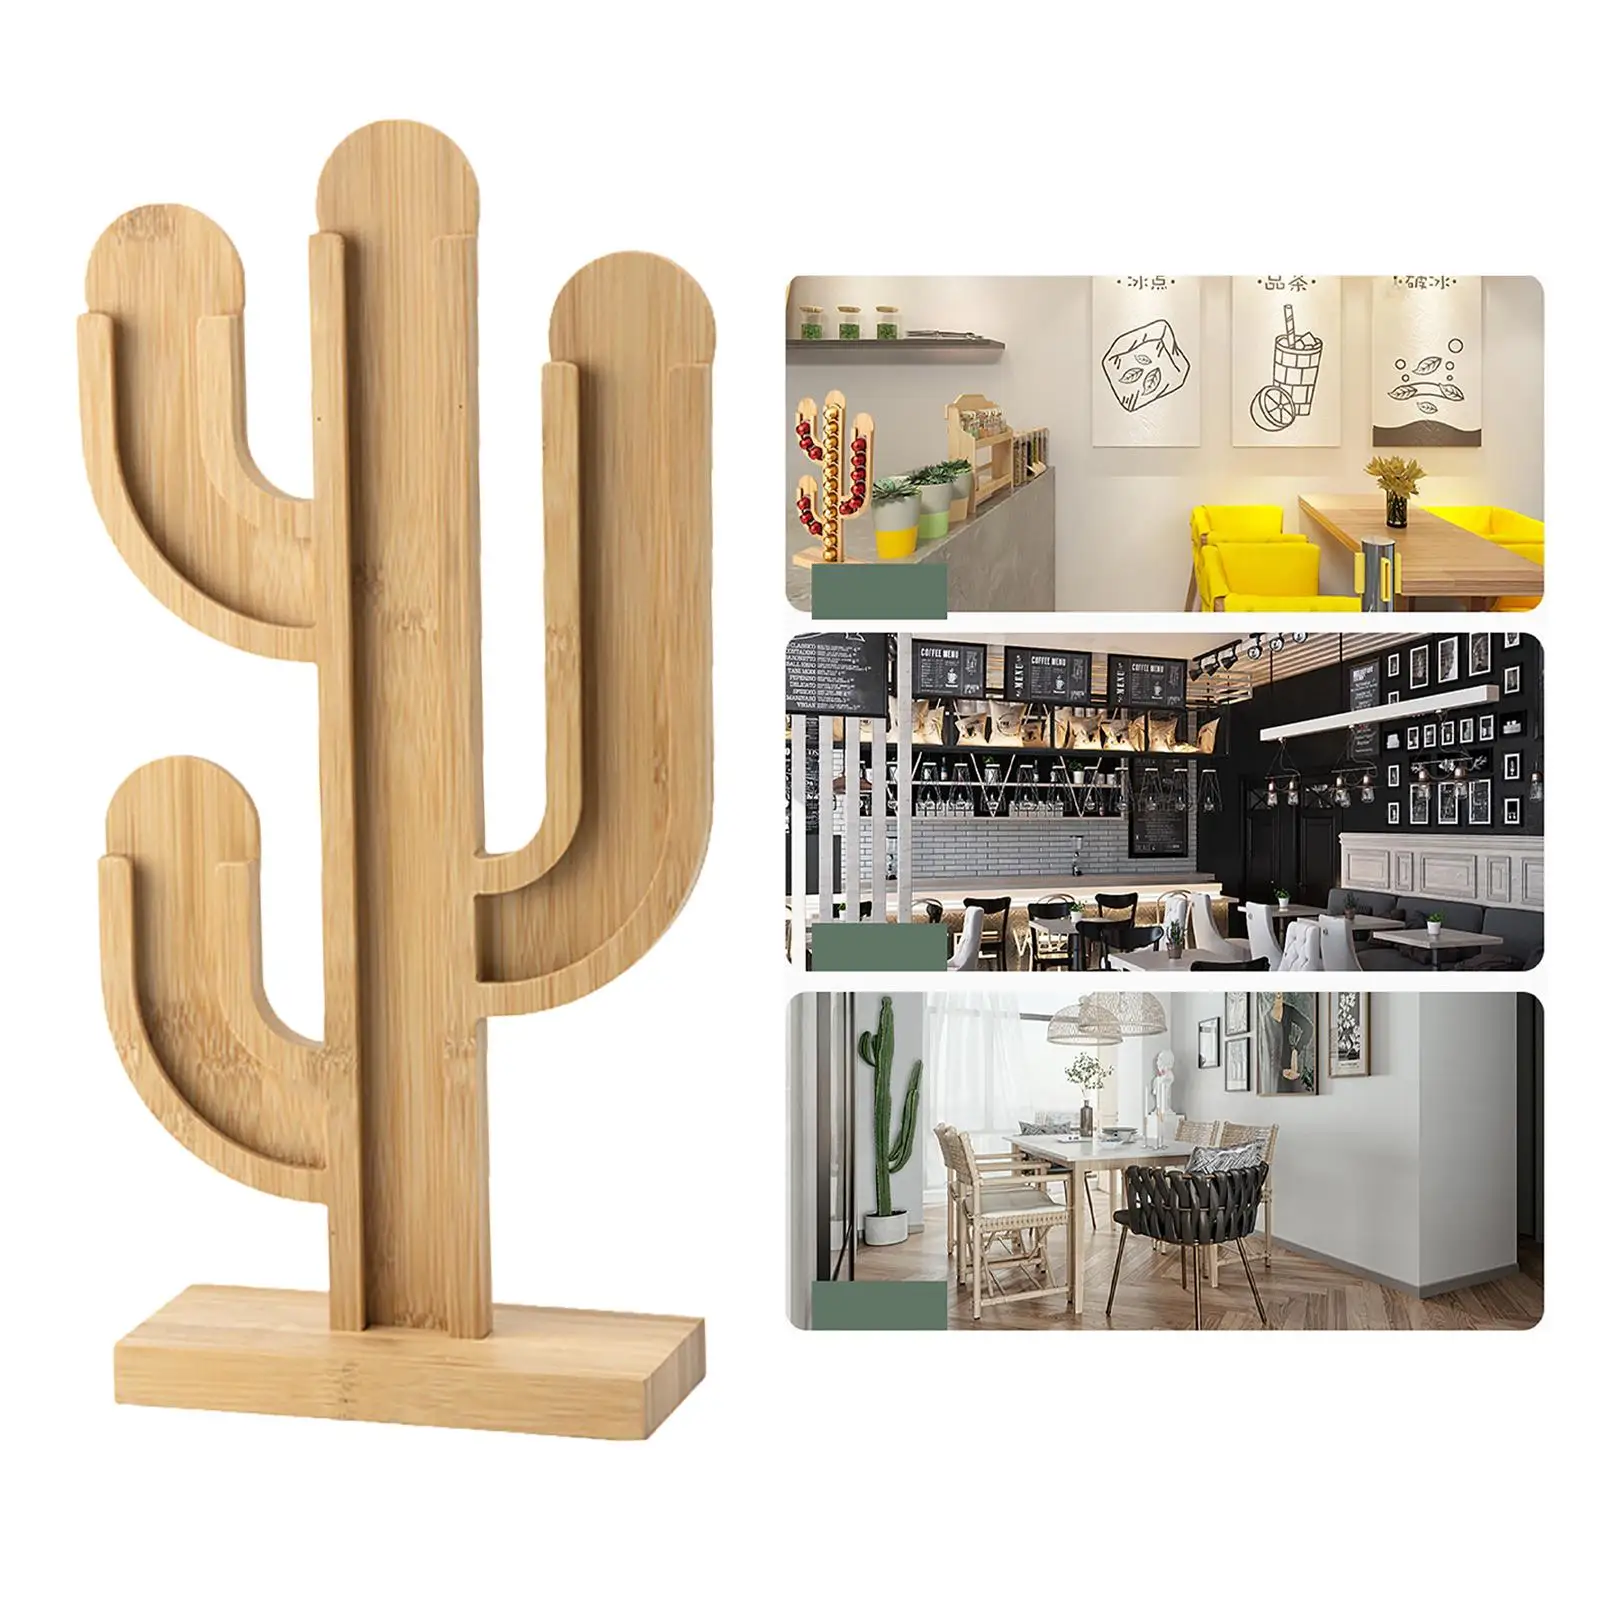 Wood Coffee Capsule Holder Cactus Shape Tower Stand Coffee Capsule Storage Dispenser Coffee Pod Holder for Home Drink Shop Hotel